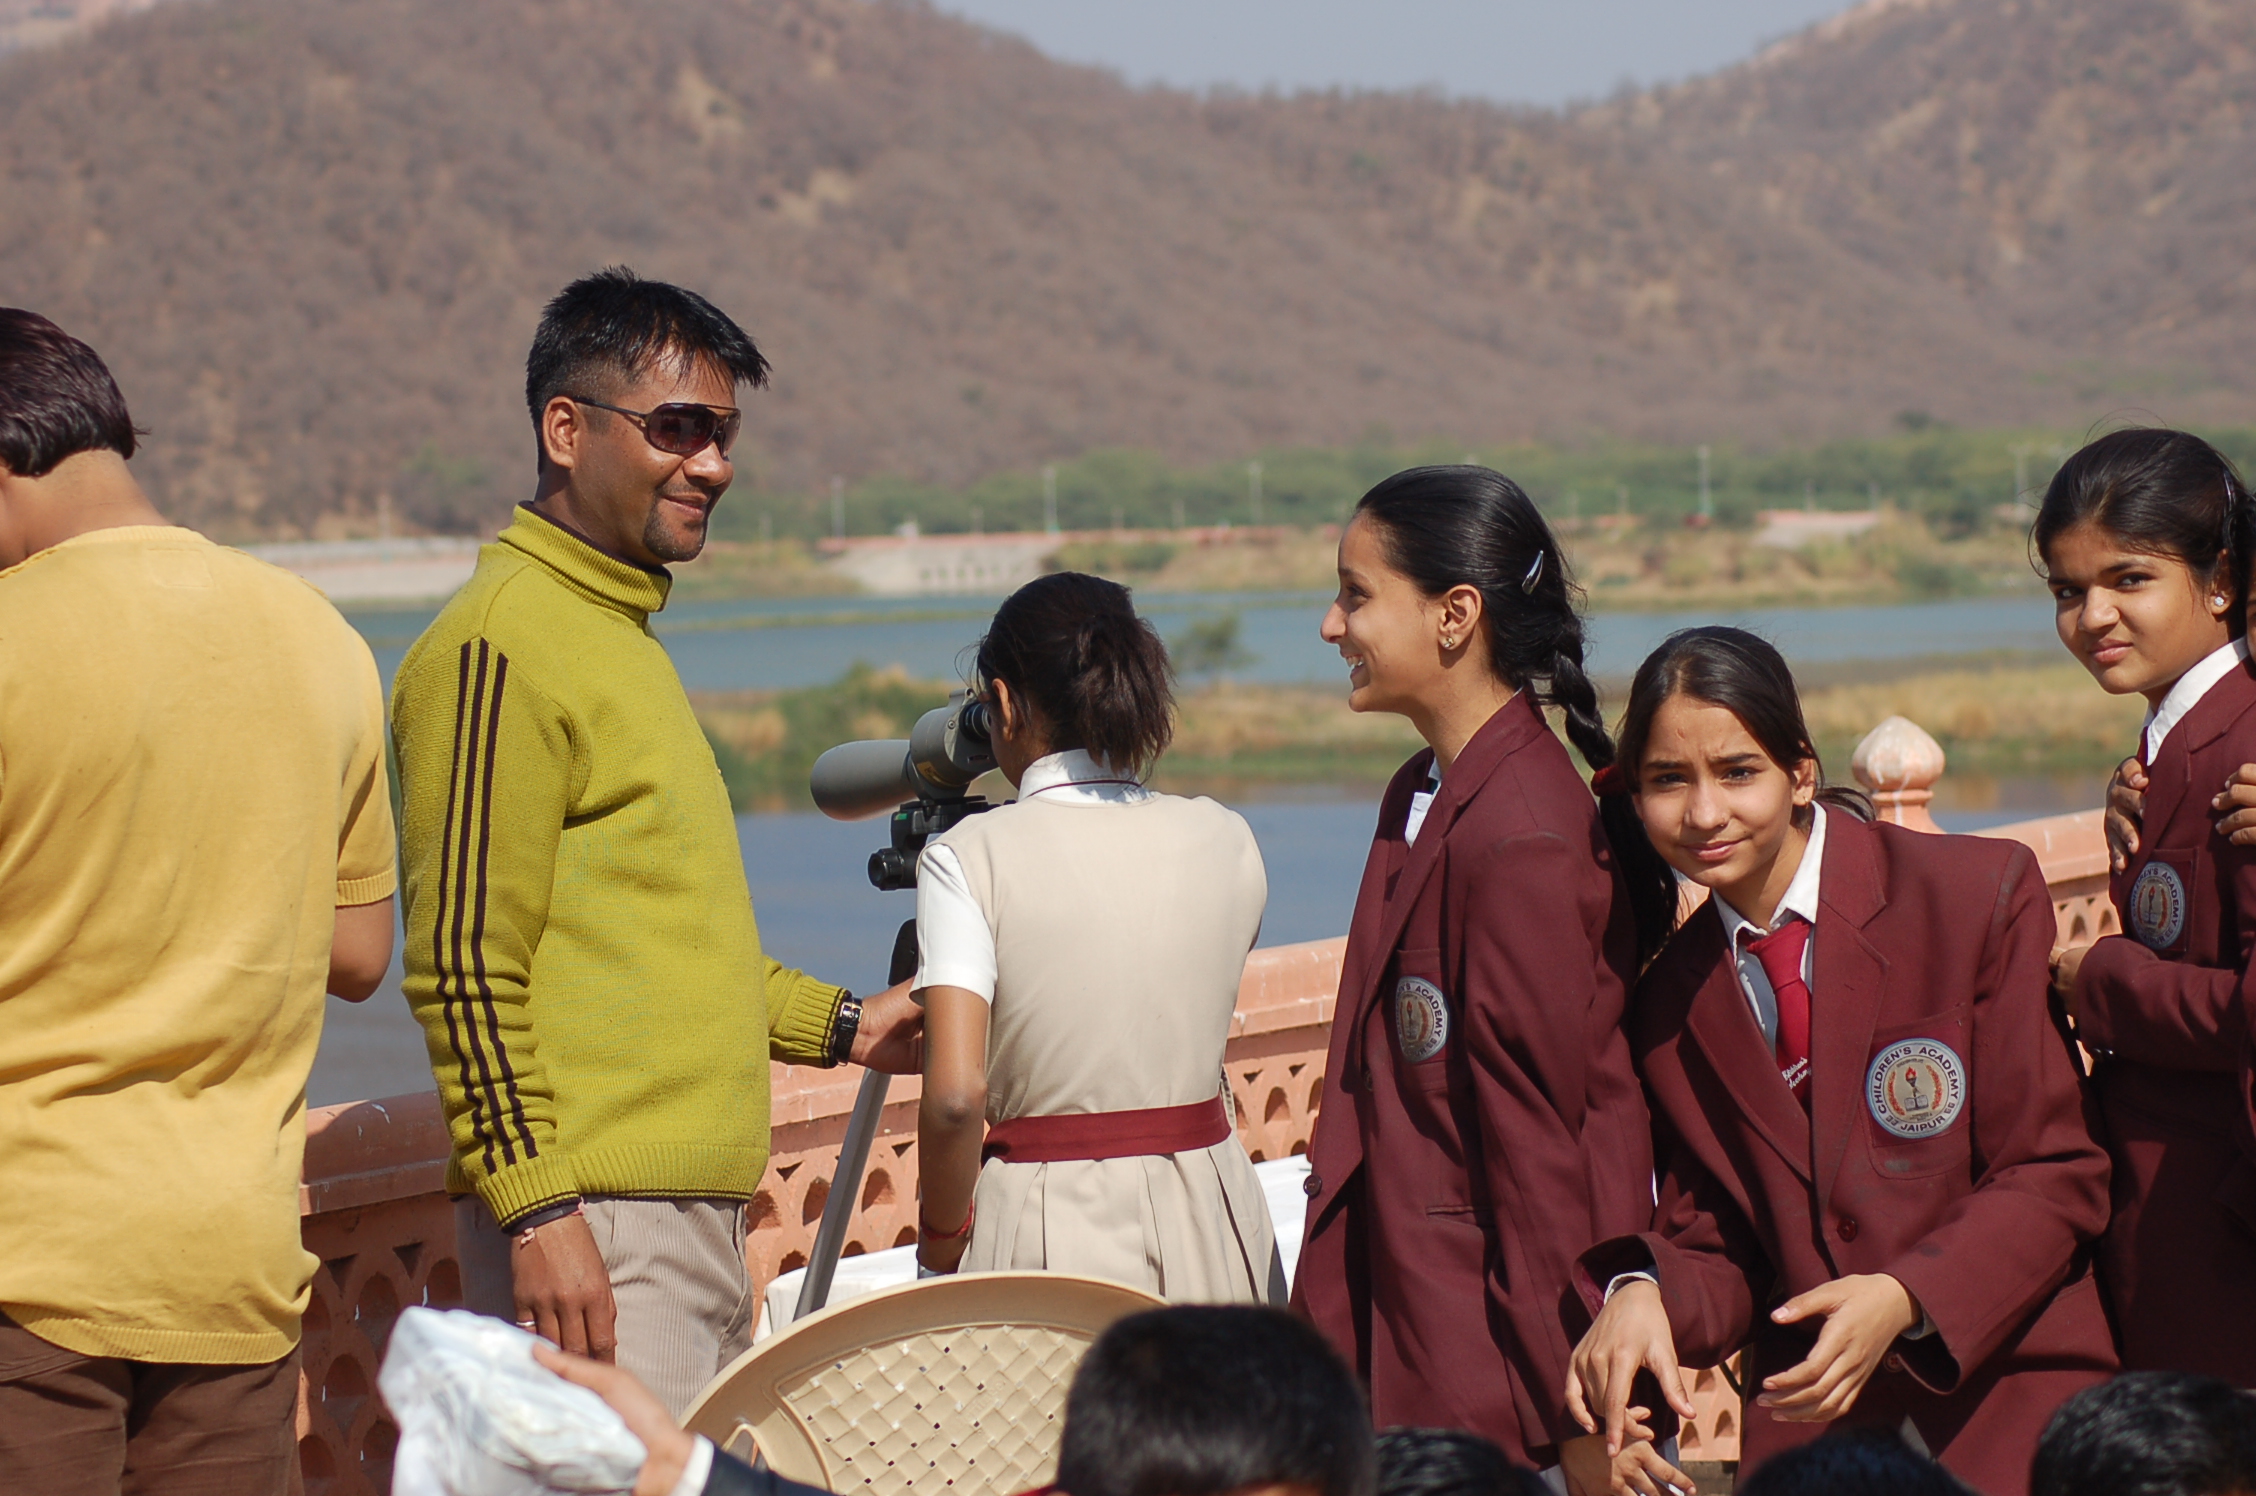 Govind Yadav giving birding tips to students at the Fair